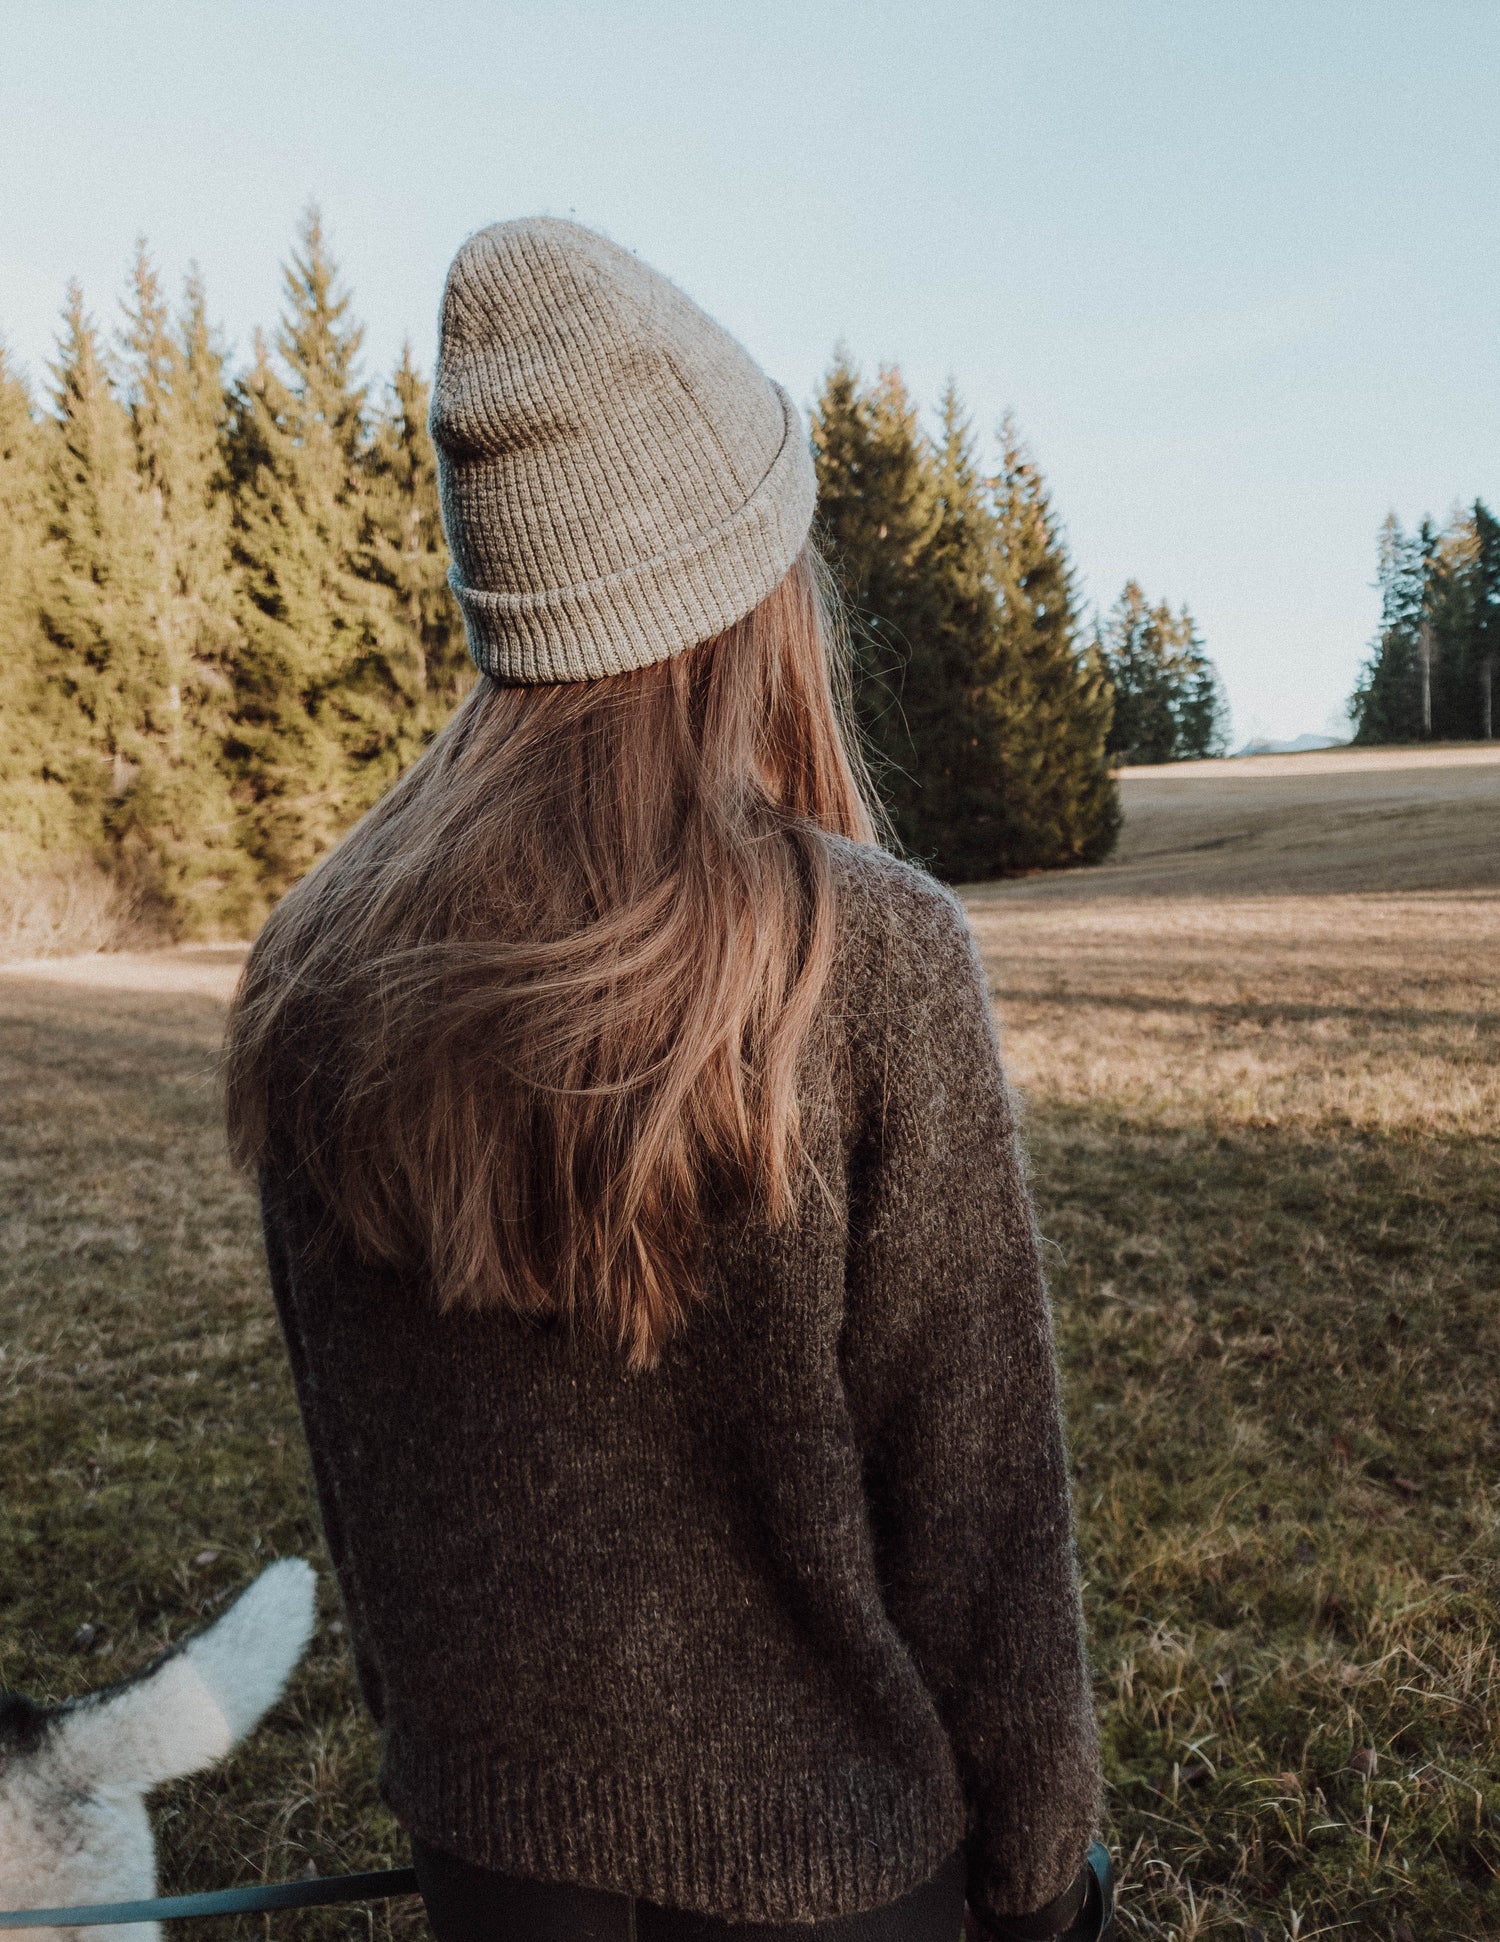 Knitwear designer Woodlandsknits with long dark blonde hair, wearing a nature black hand-knitted sweater made from unspun Nutiden yarn and a grey hat, standing in an alpine field at sundown, gazing towards the horizon lined with tall trees; a tip of a husky's tail is visible in the corner.